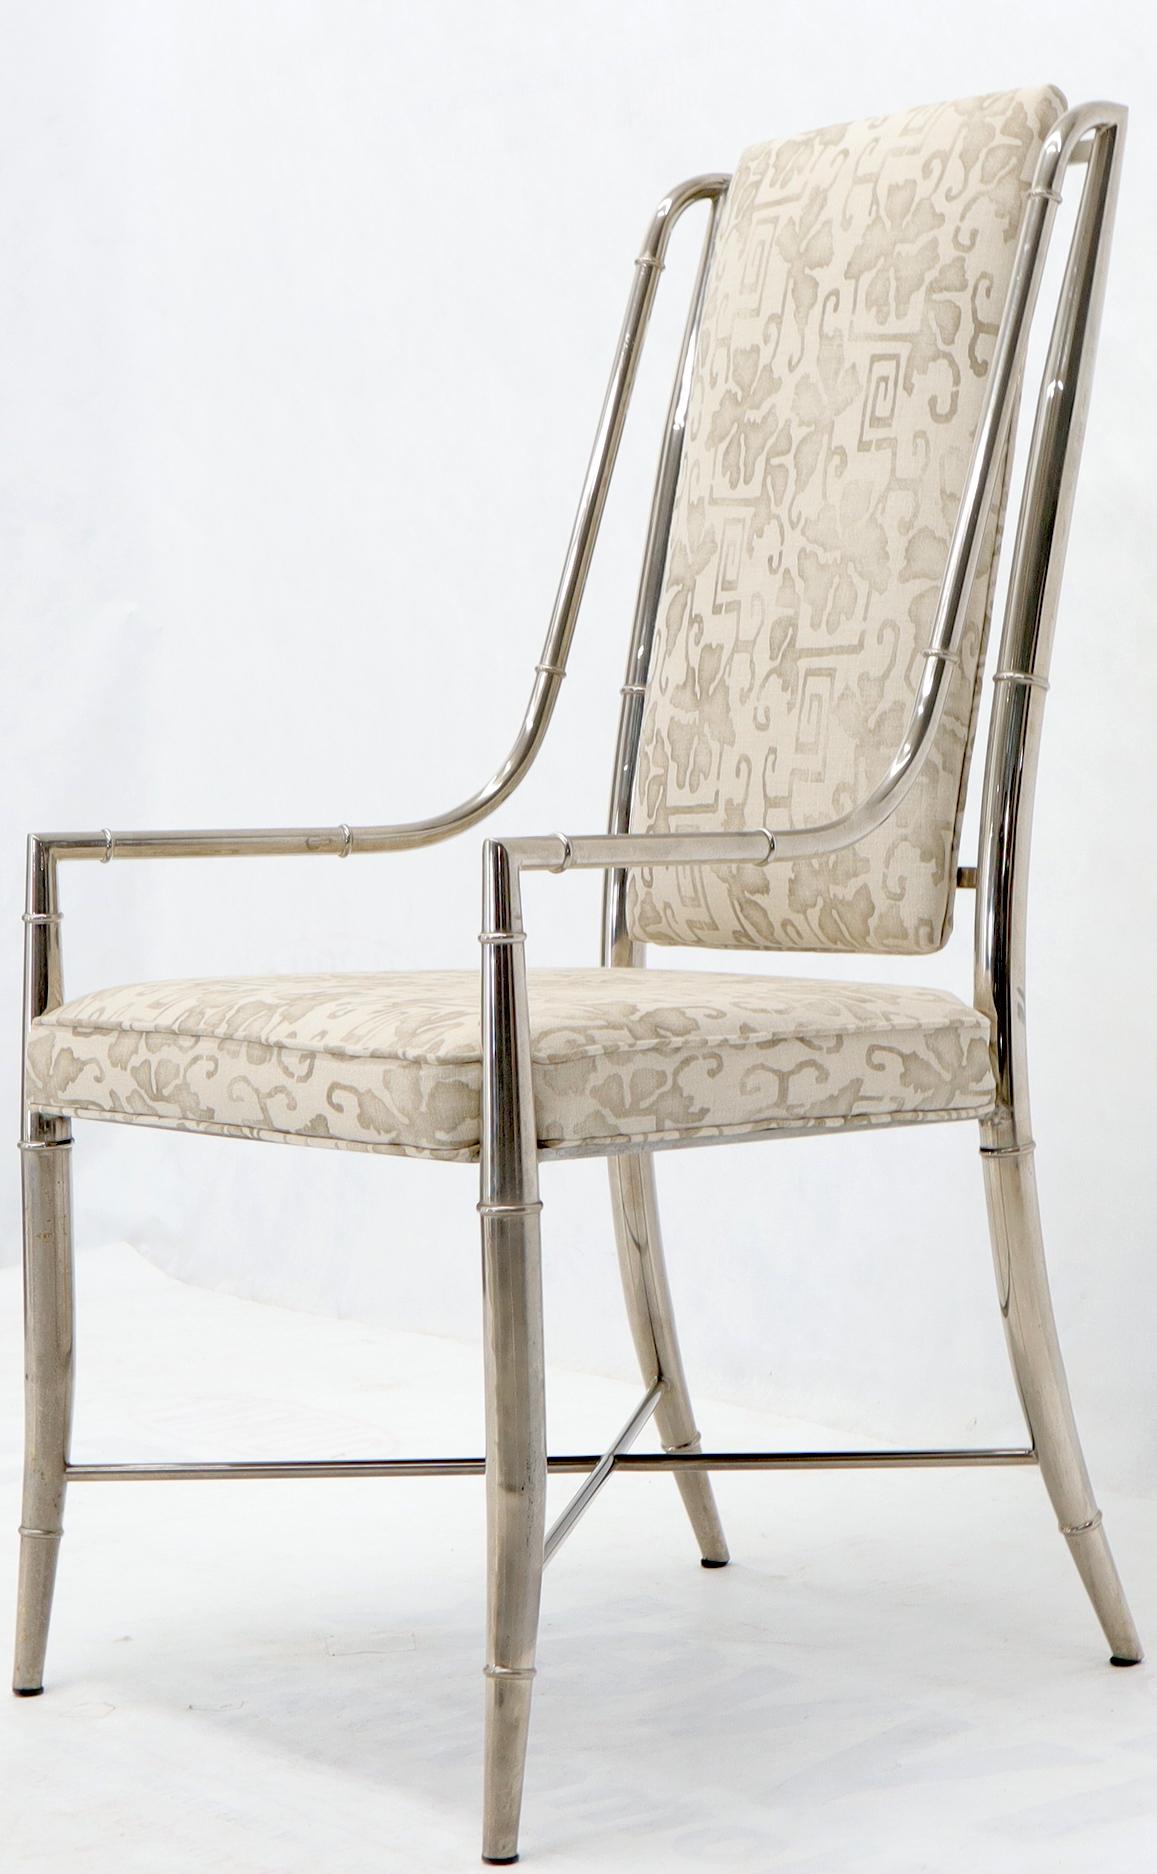 Imperial Dining Room Chair by Weiman / Warren Lloyd for Mastercraft in Chrome 3